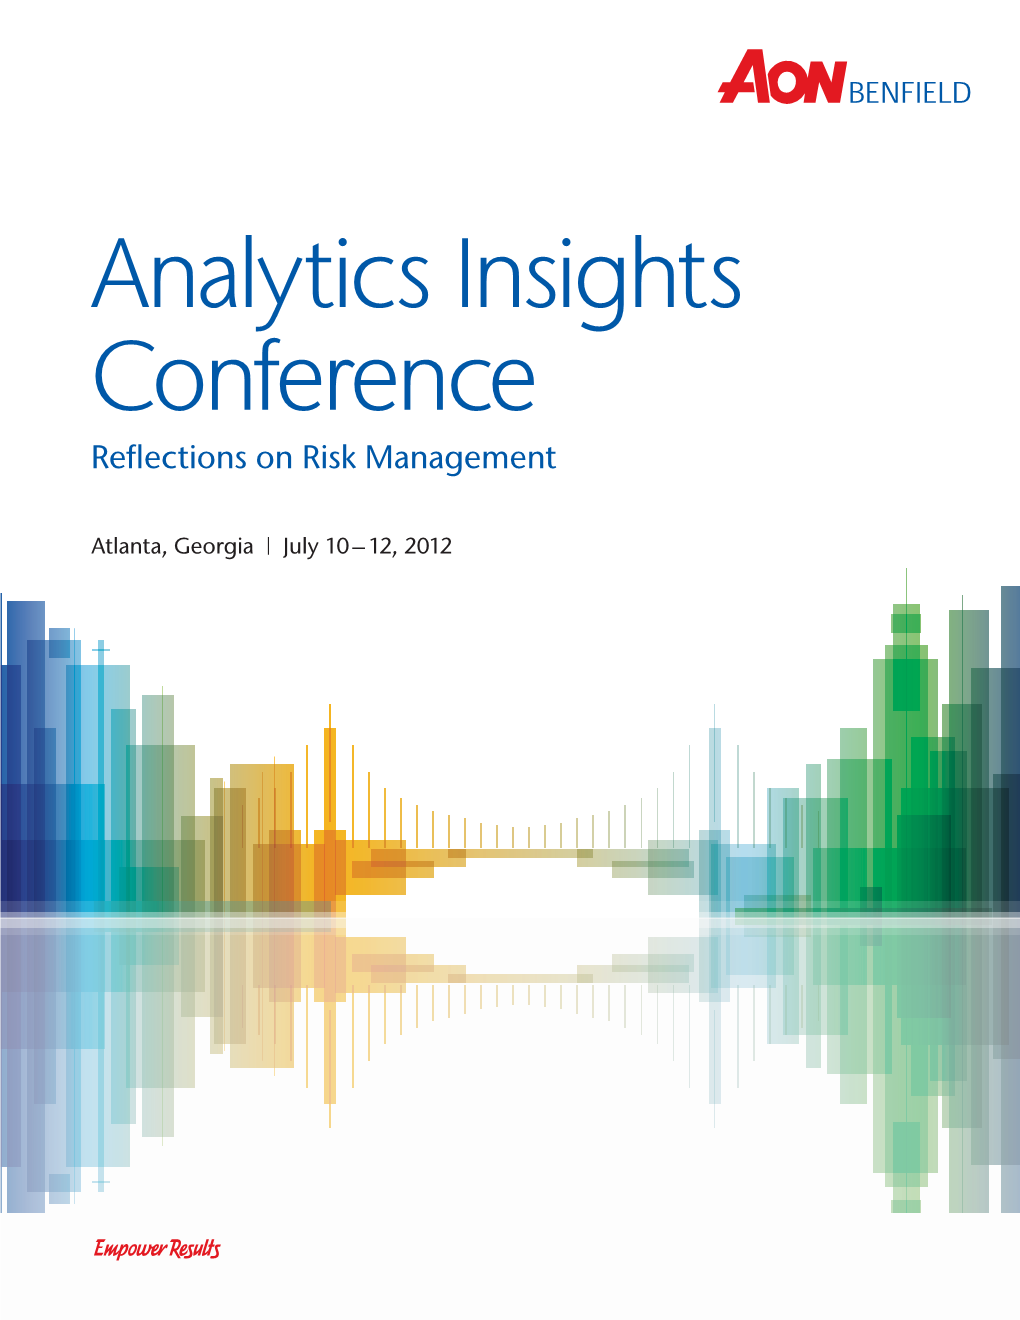 Analytics Insights Conference Reflections on Risk Management